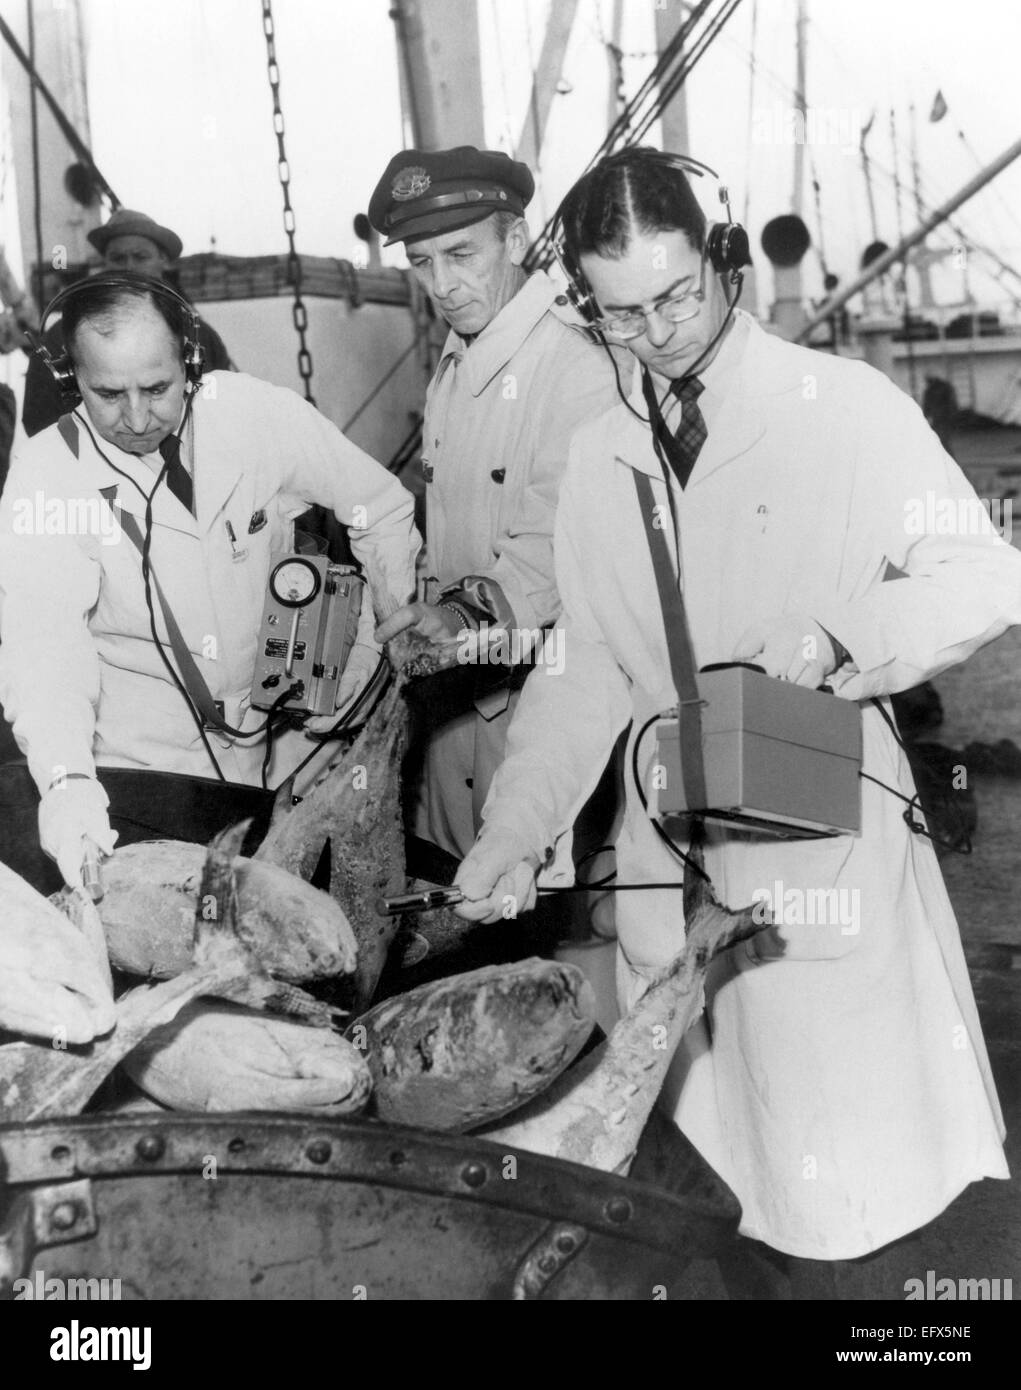 White-coated Food and Drug Administration officials use Geiger counters to measure freshly caught tuna fish for radioactivity after concern for contamination following U.S. atomic bomb tests in the Pacific Ocean resulted in monitoring from 1954 to the 1960s. Stock Photo